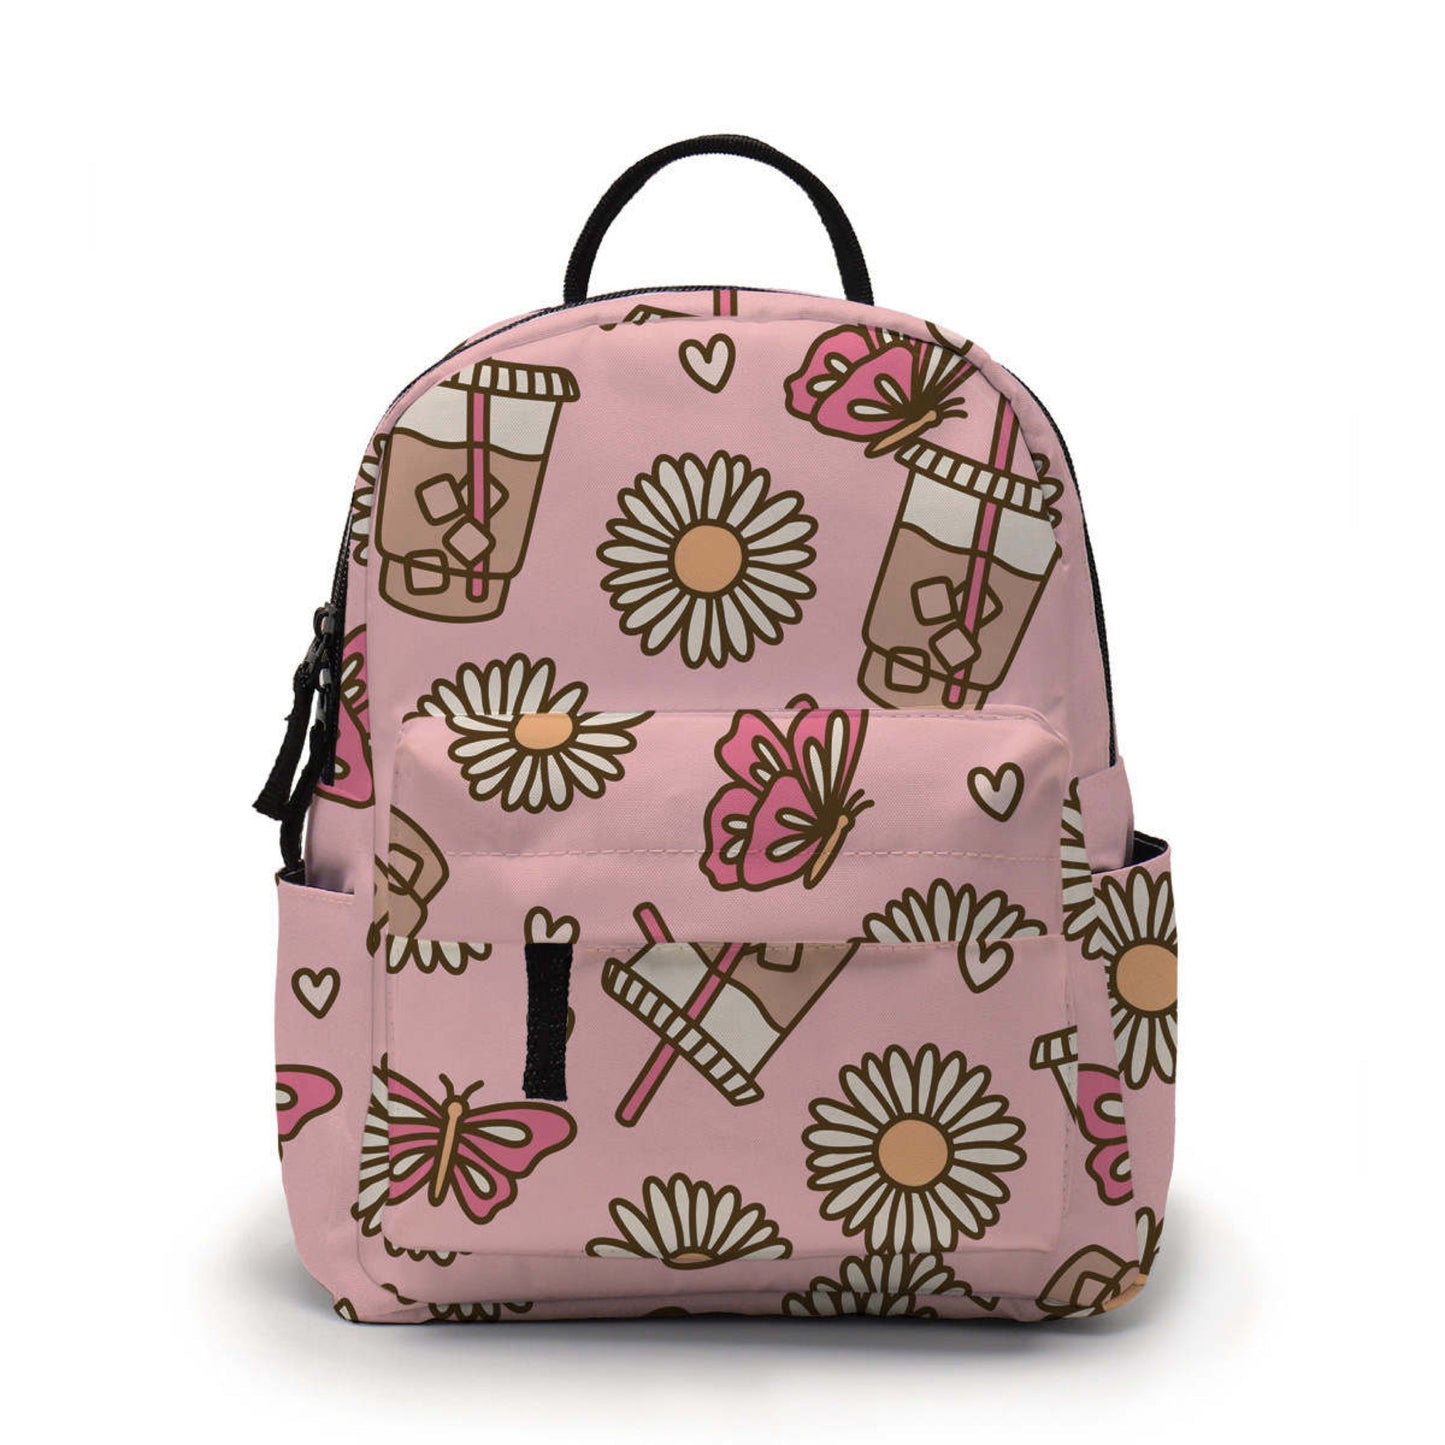 Pouch & Mini Backpack Set - Pink Iced Coffee Daisy